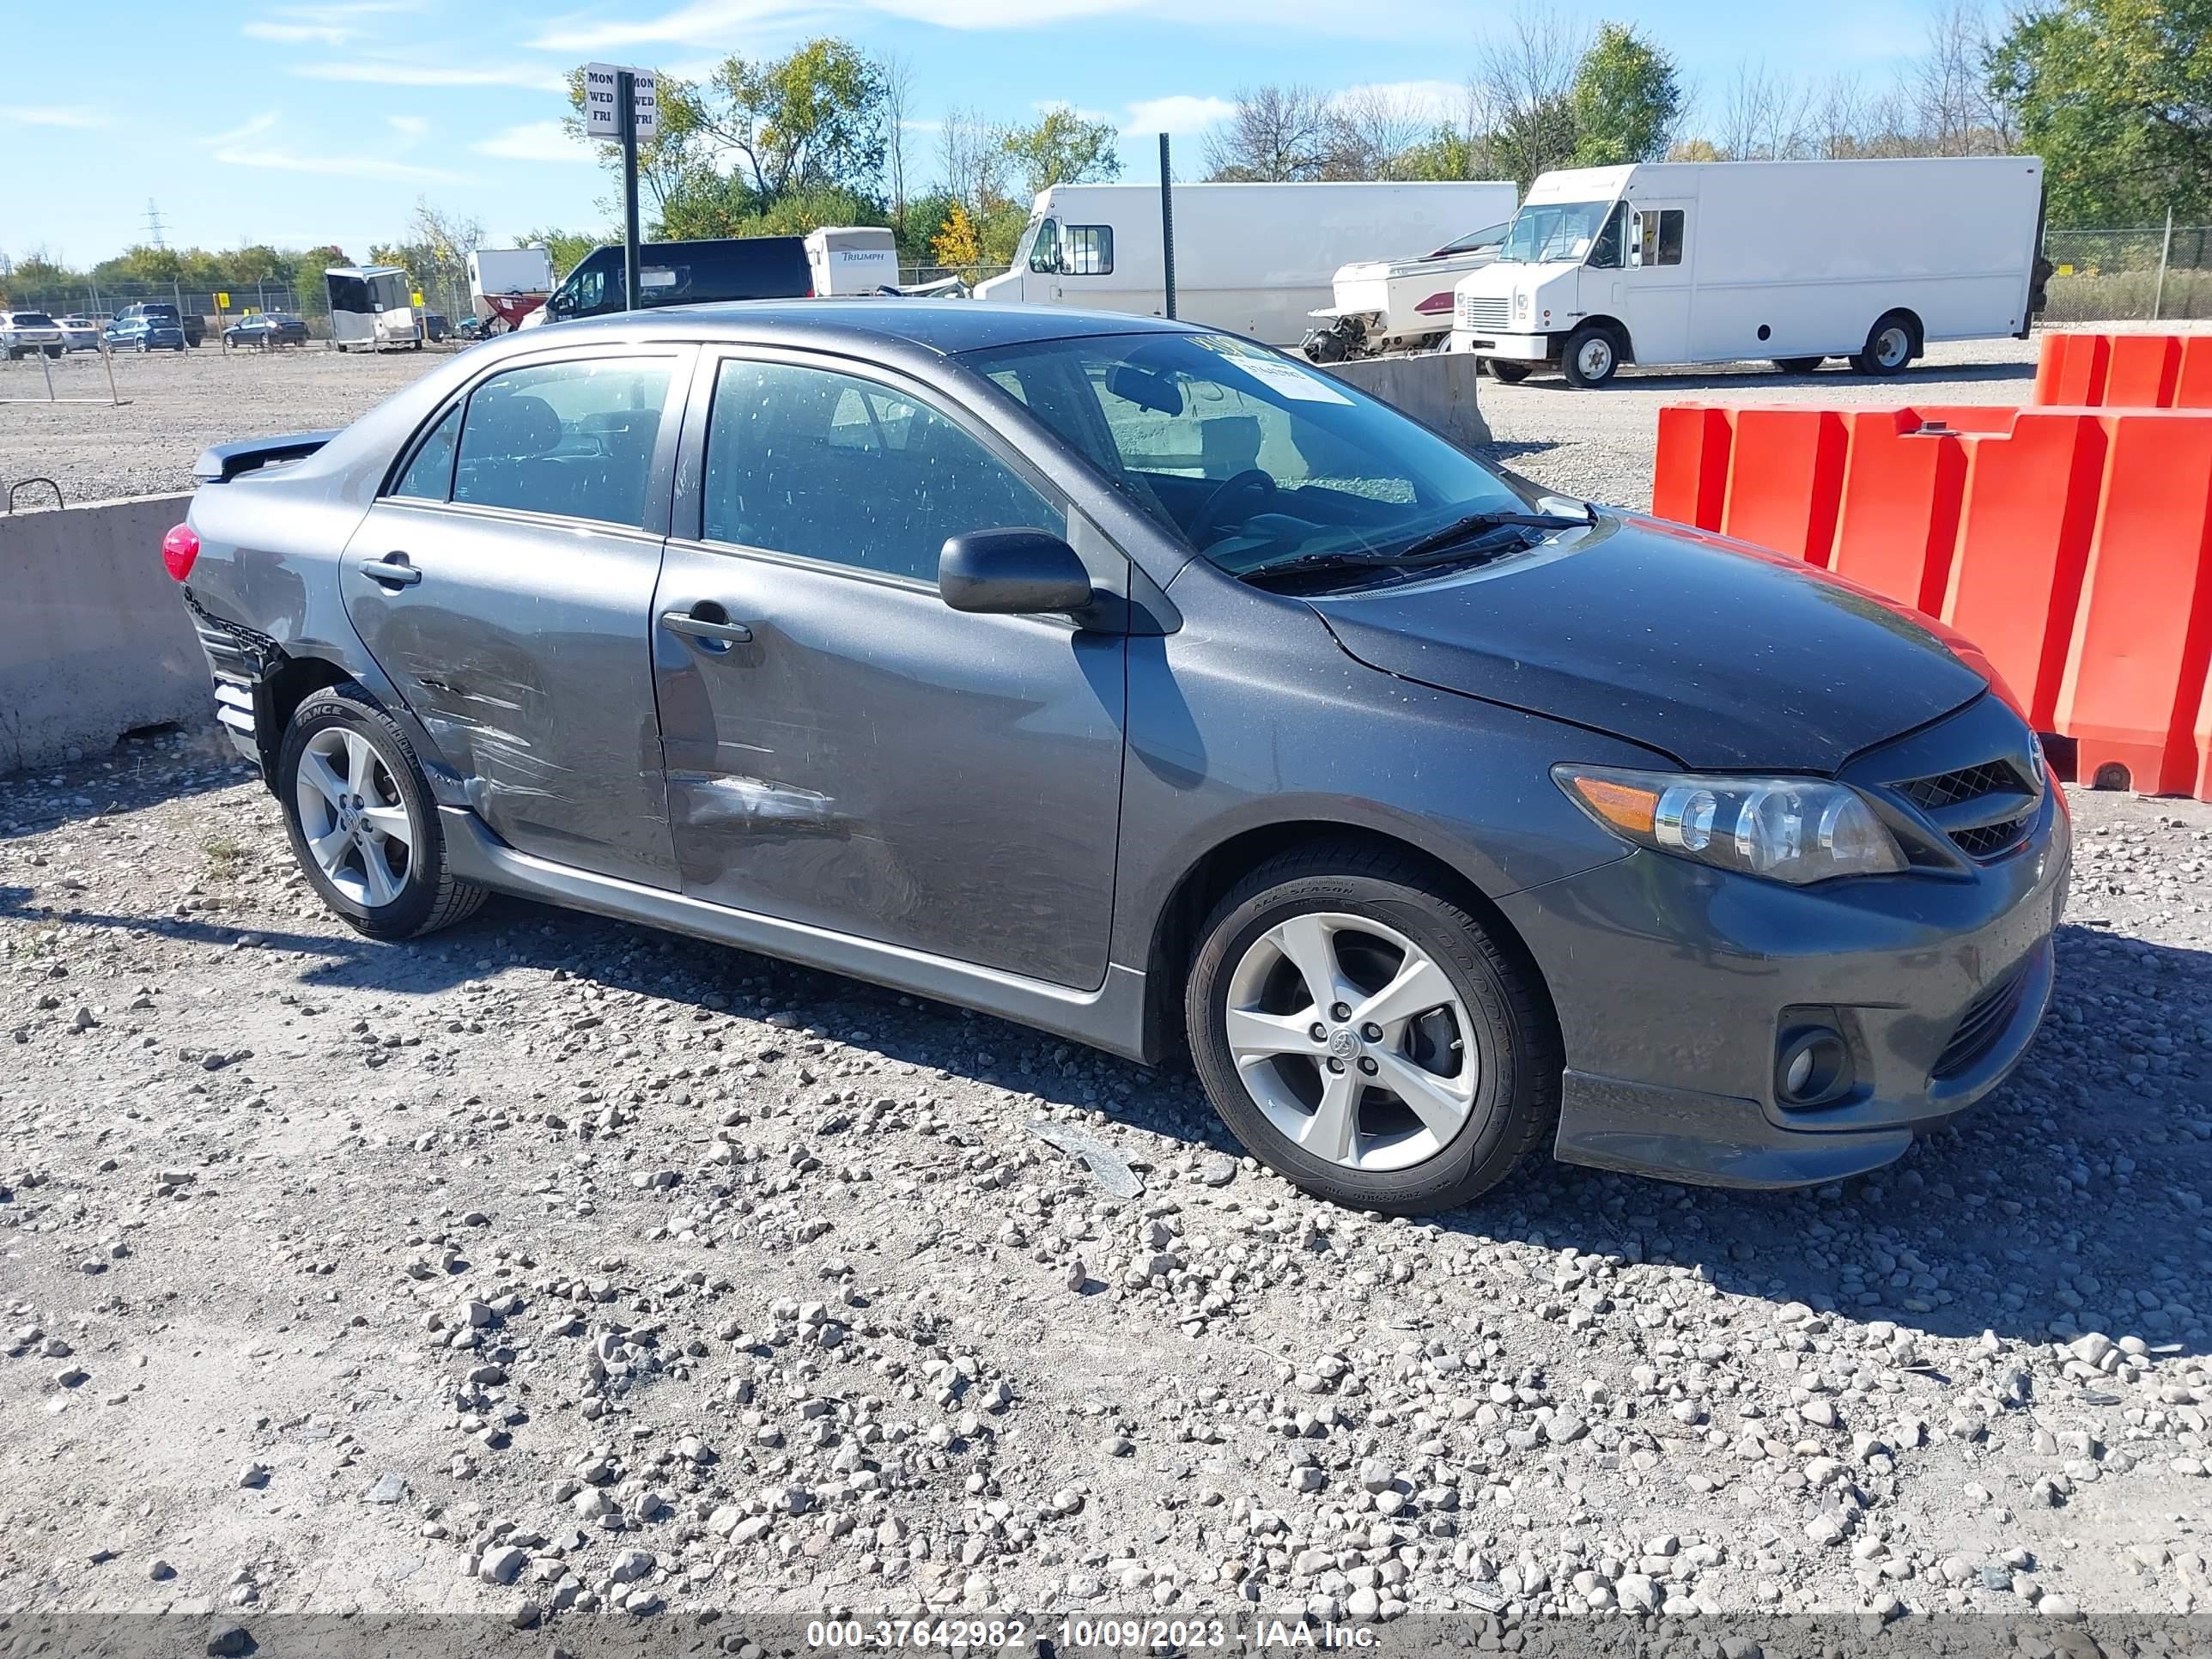 vin: 2T1BU4EE3DC122968 2T1BU4EE3DC122968 2013 toyota corolla 1800 for Sale in 54914, 2591 S Casaloma Dr, Appleton, Texas, USA